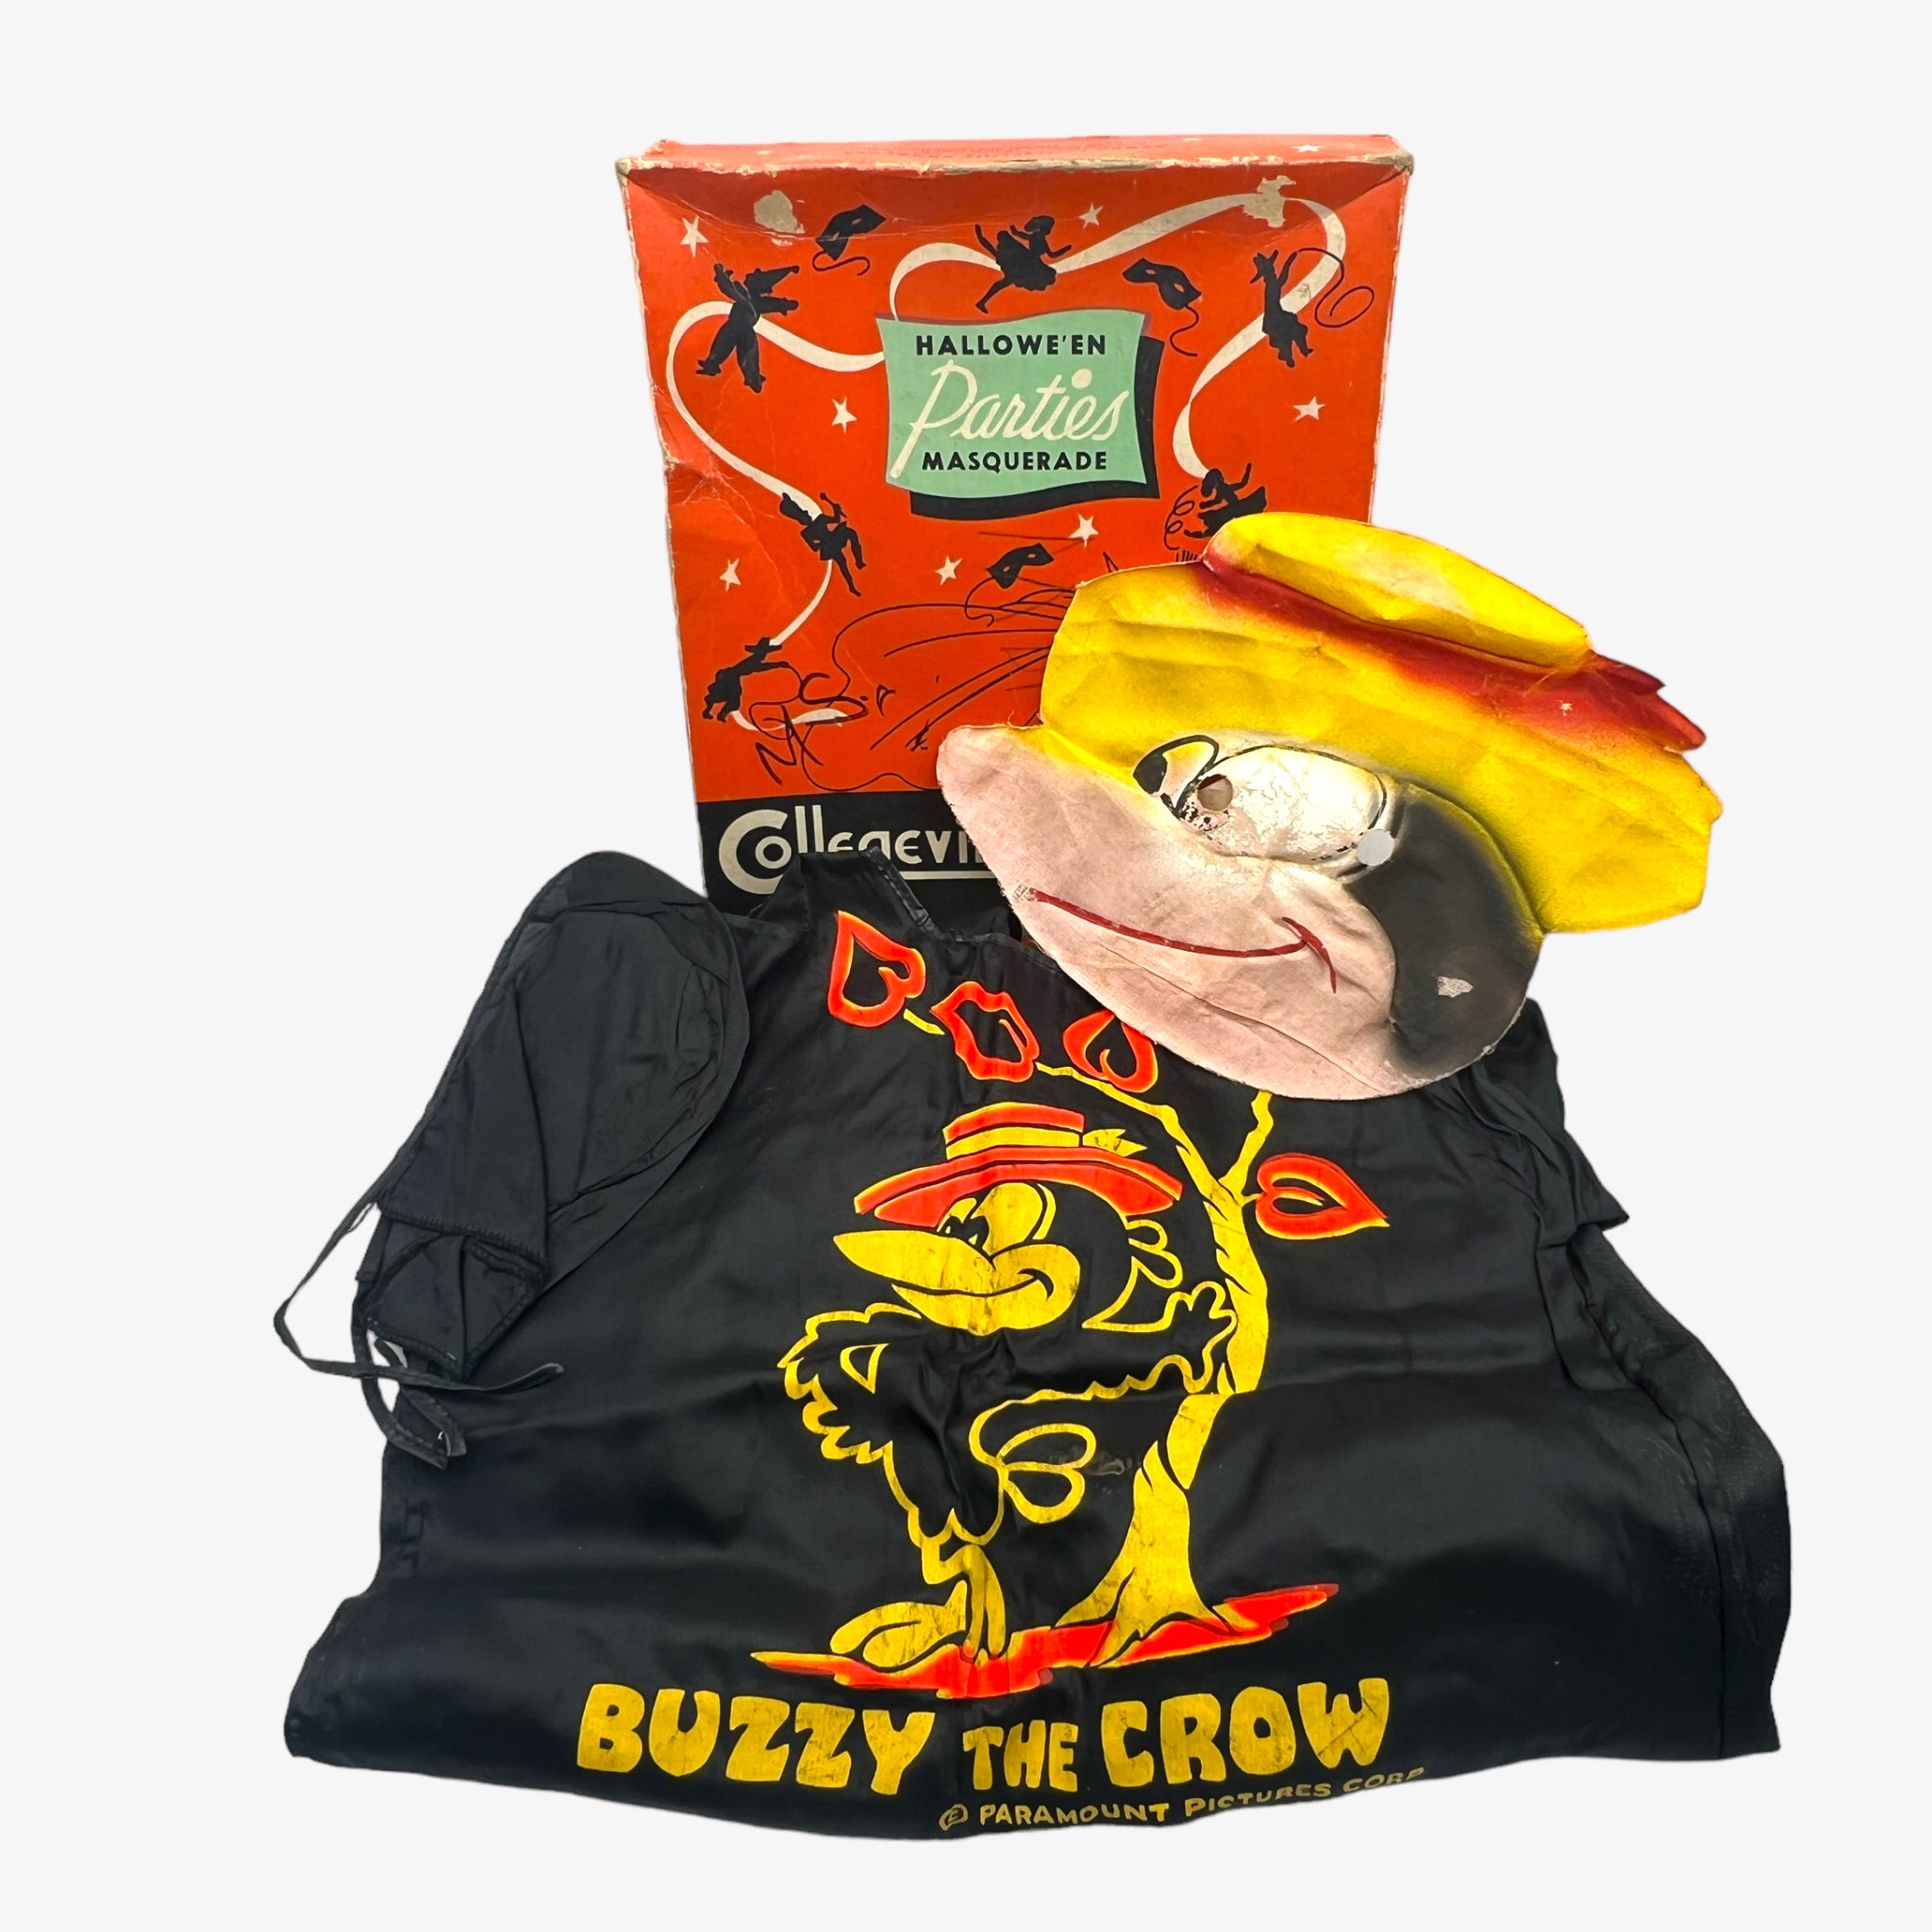 Vintage Collegeville Buzzy the Crow Costume